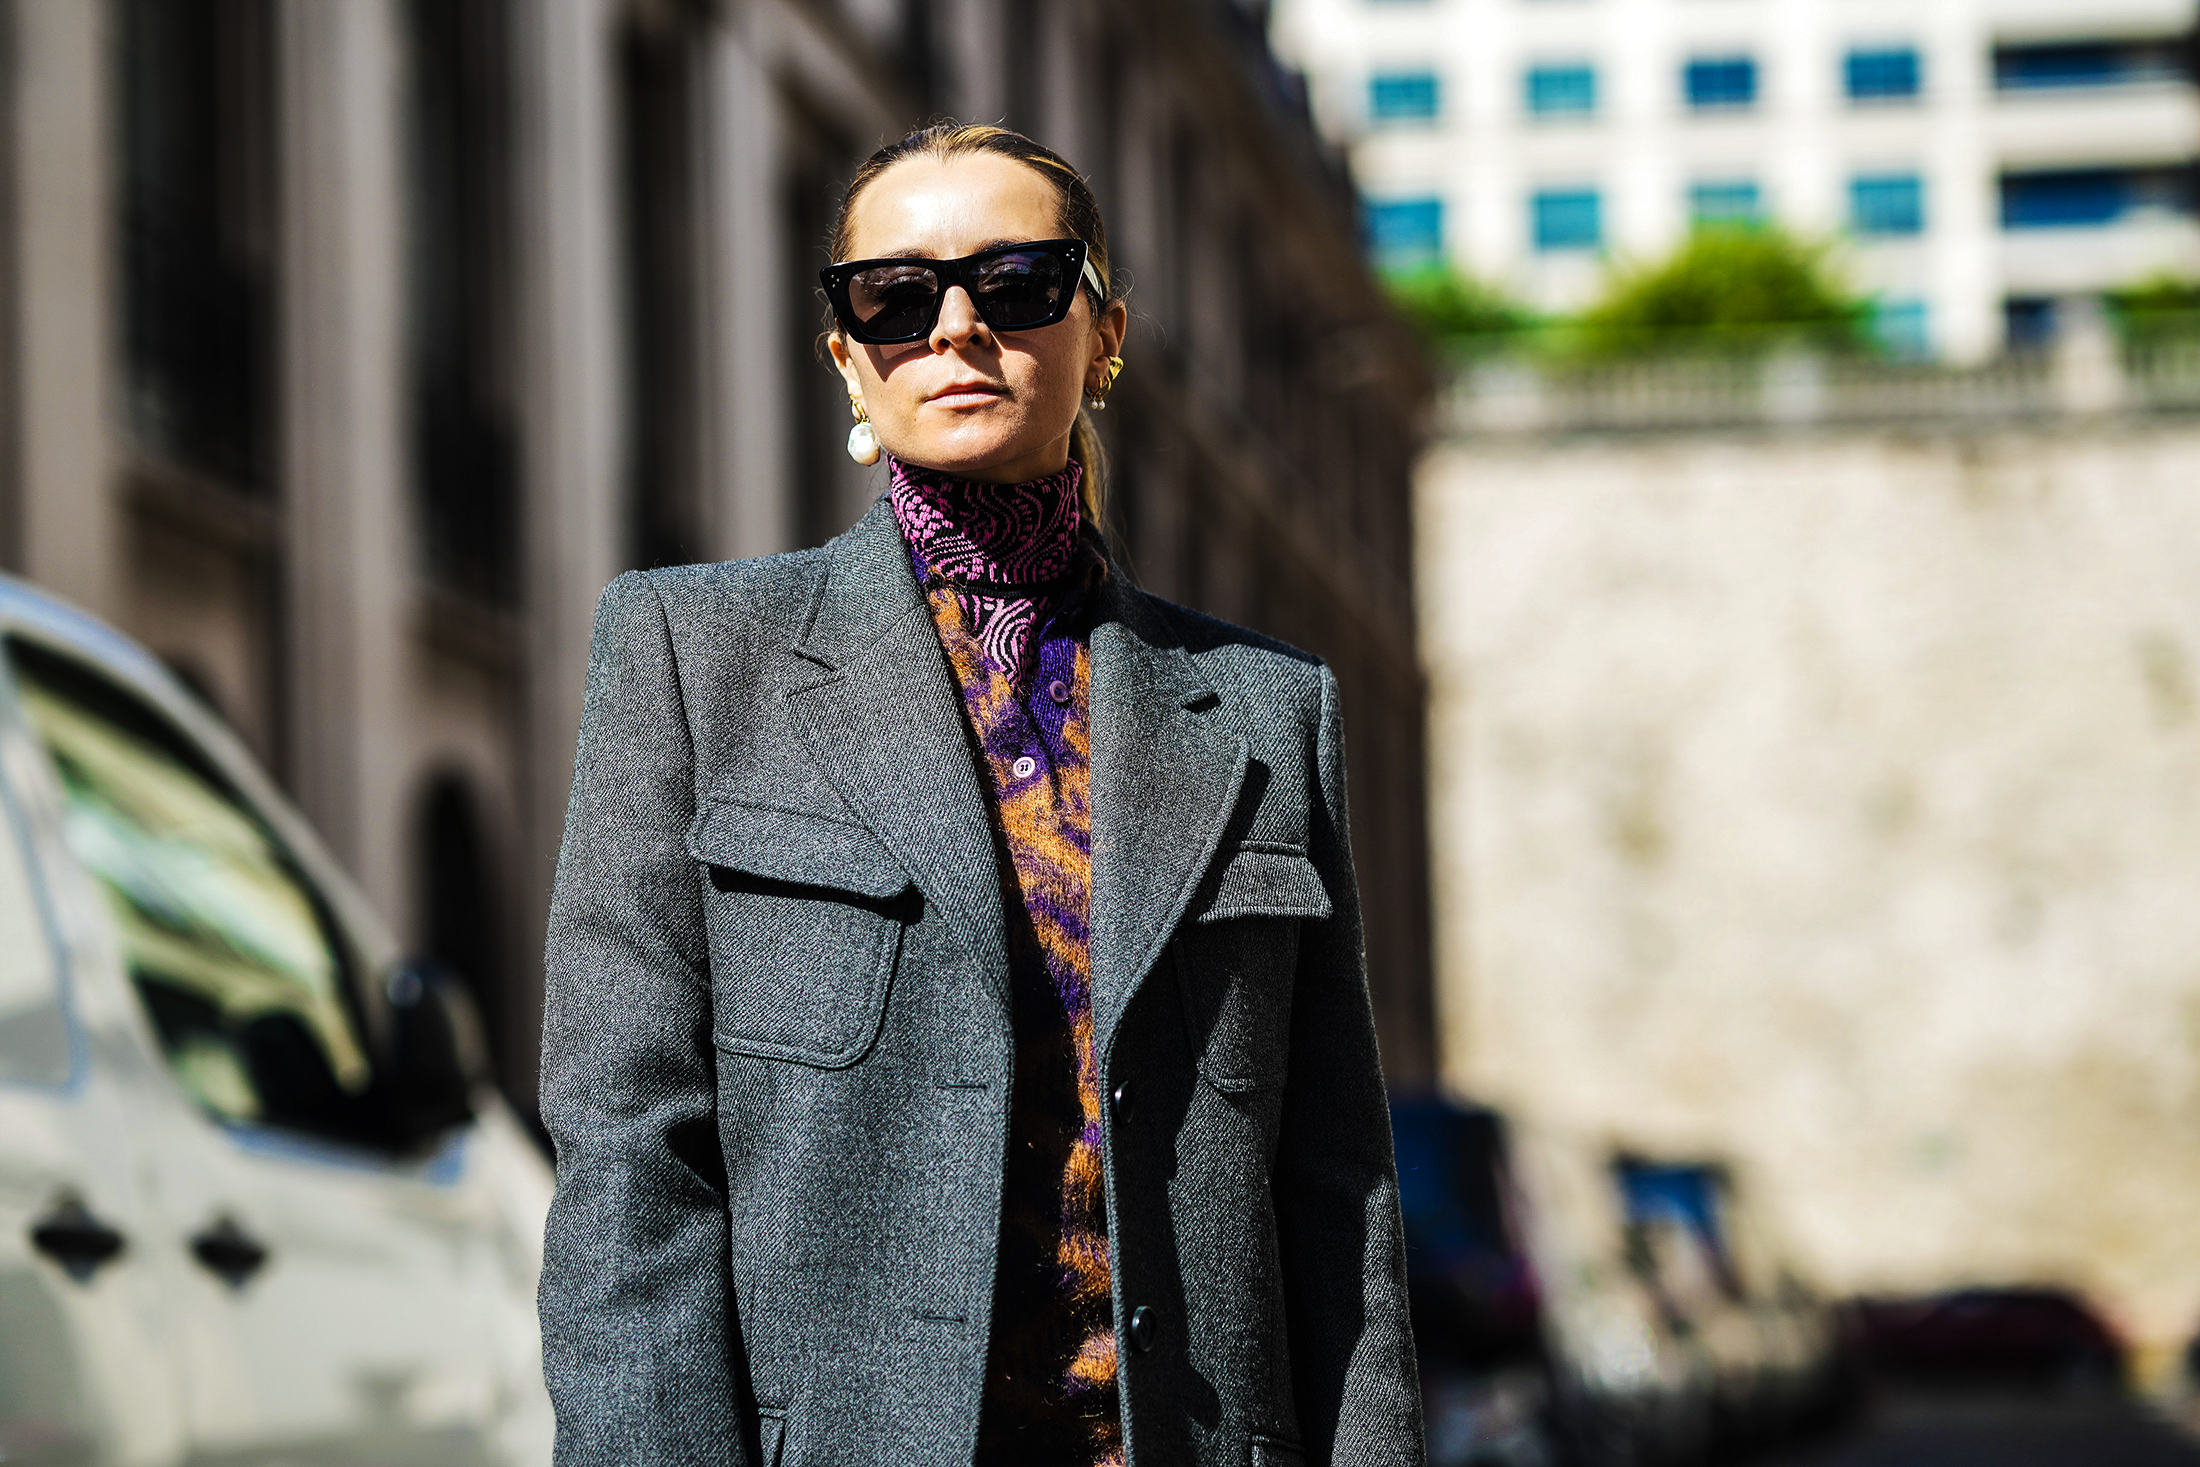 20 Cute Fall Work Outfits 2022— What to Wear to the Office